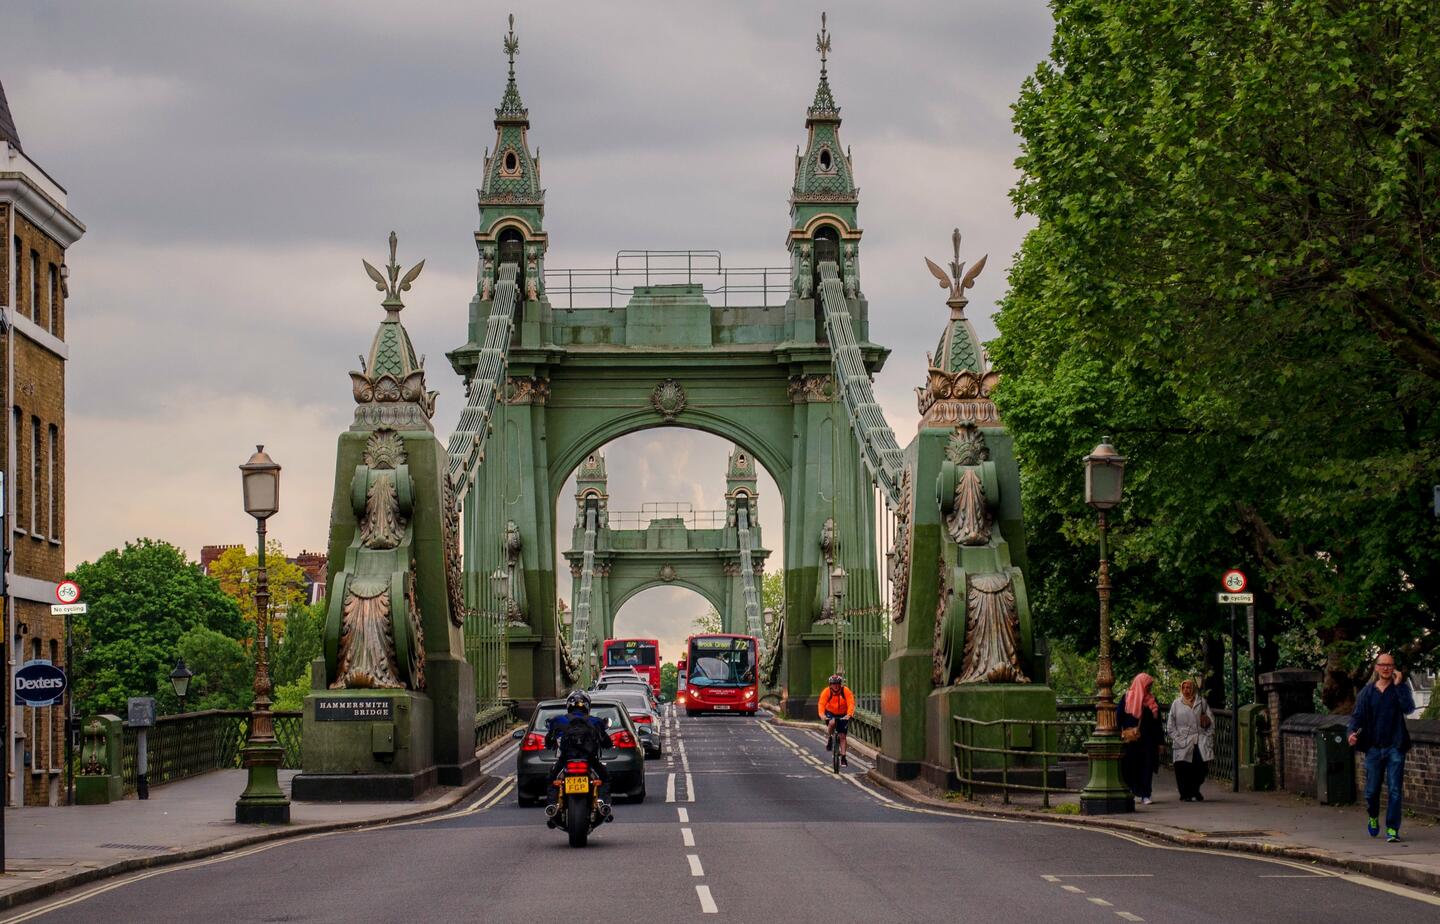 Student Accommodation in Hammersmith, London - buses and cars crossing Hammersmith Bridge